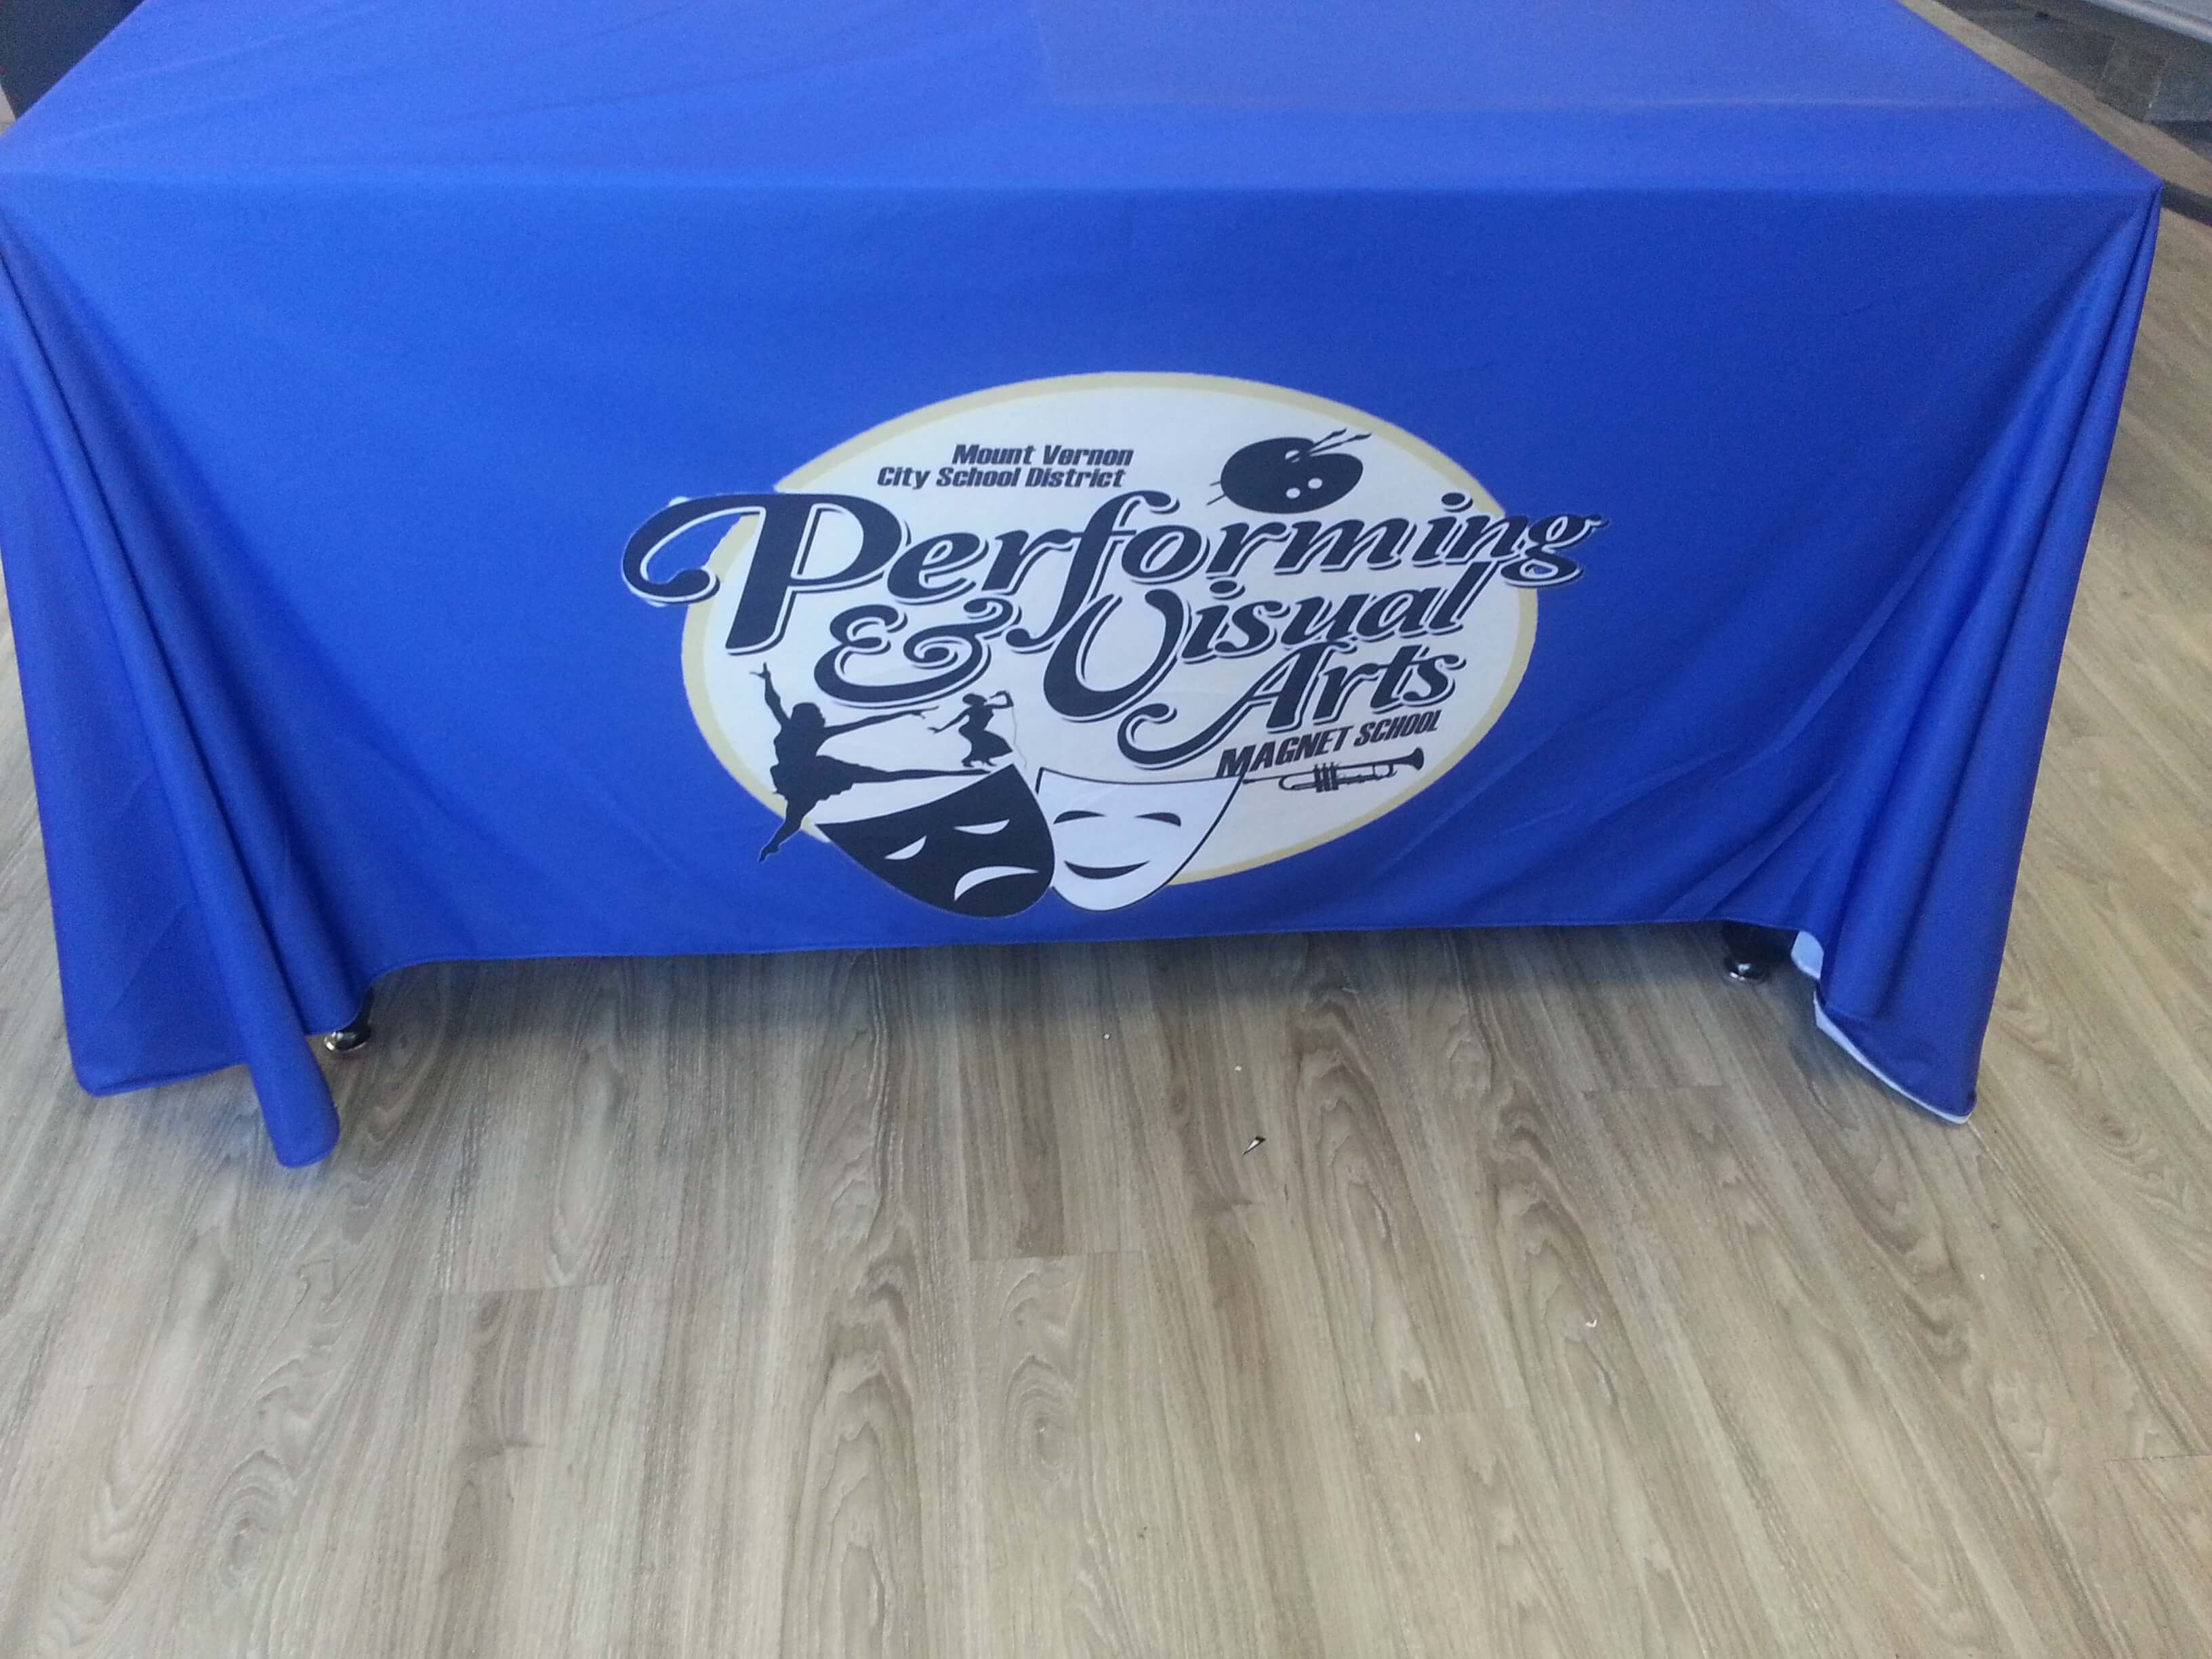 Mount Vernon City School District Performing & Visual Arts Table Cover